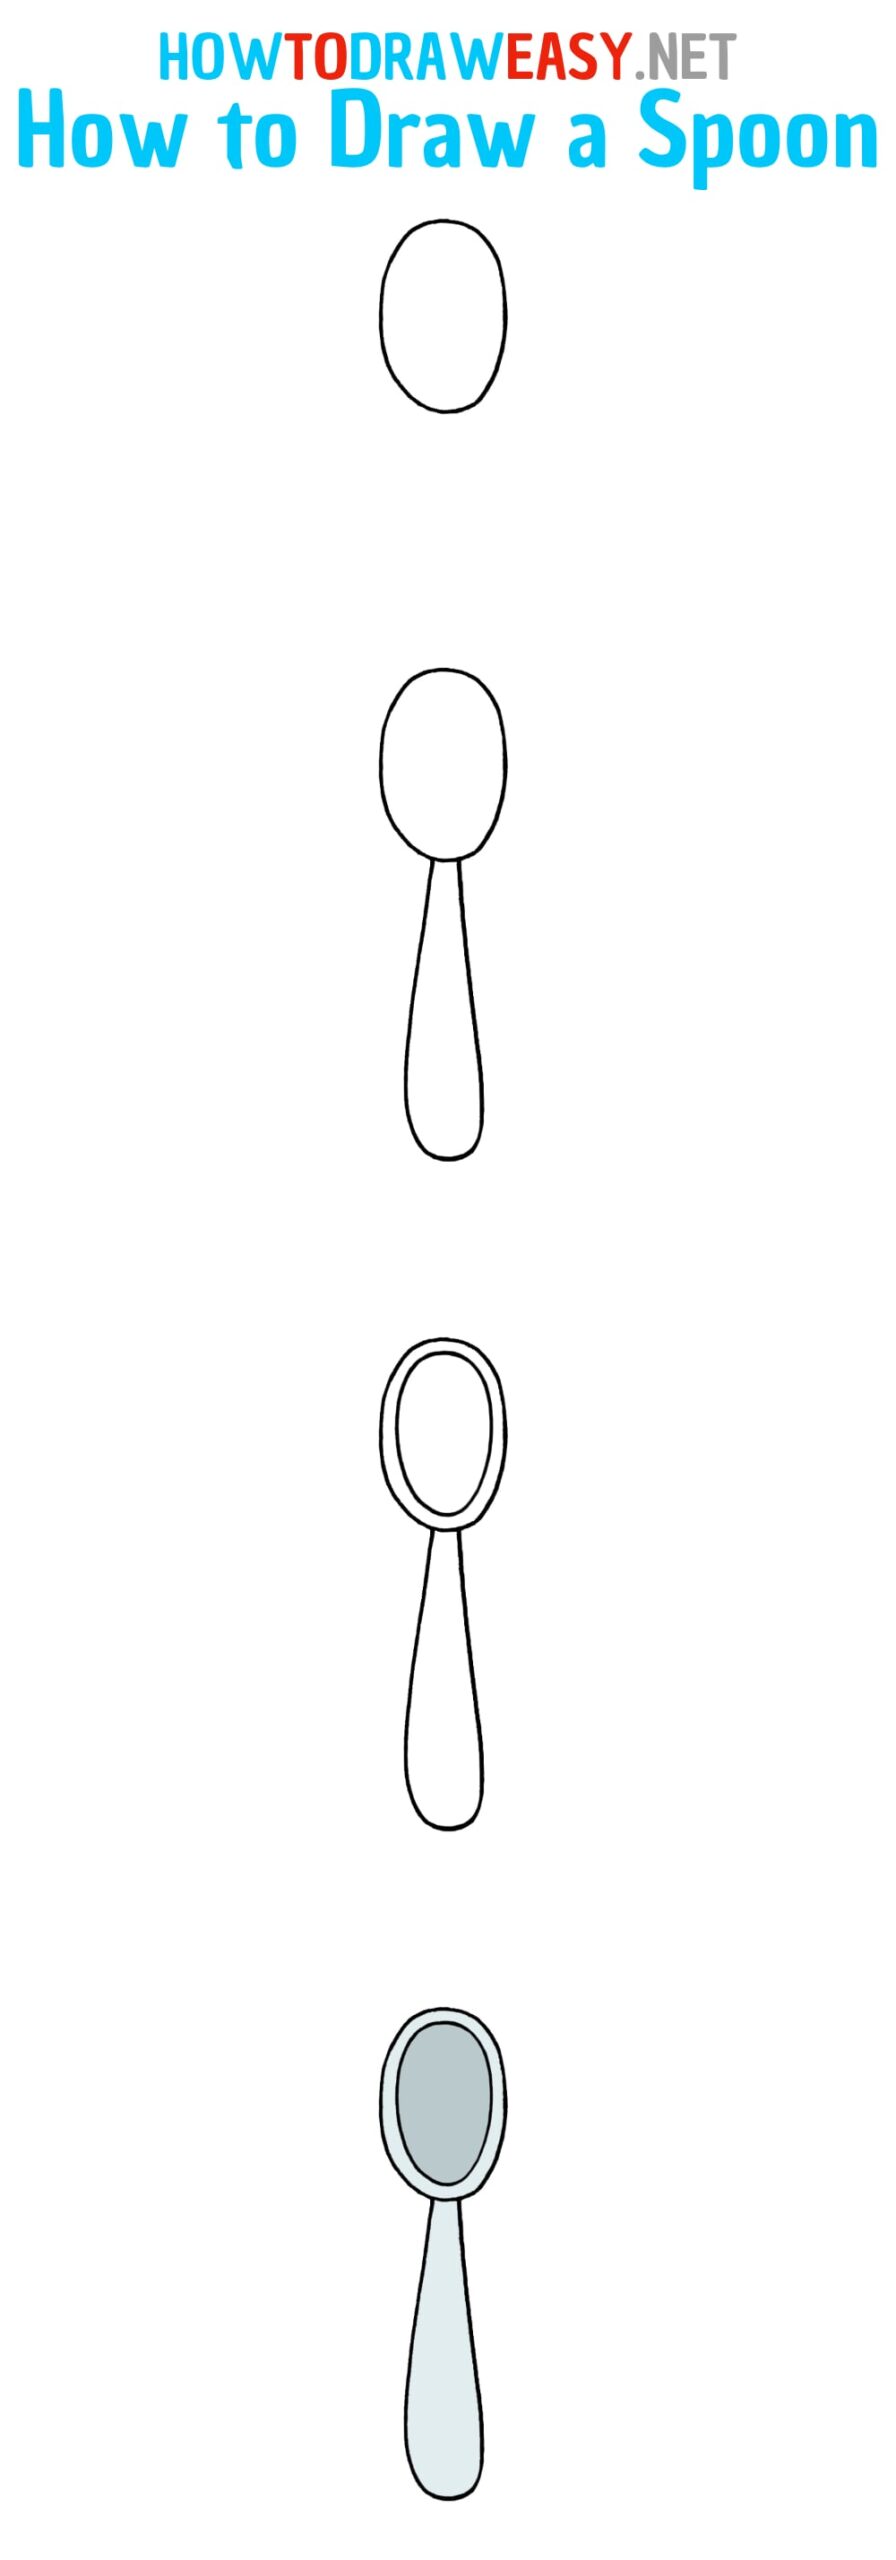 How to Draw a Spoon Step by Step